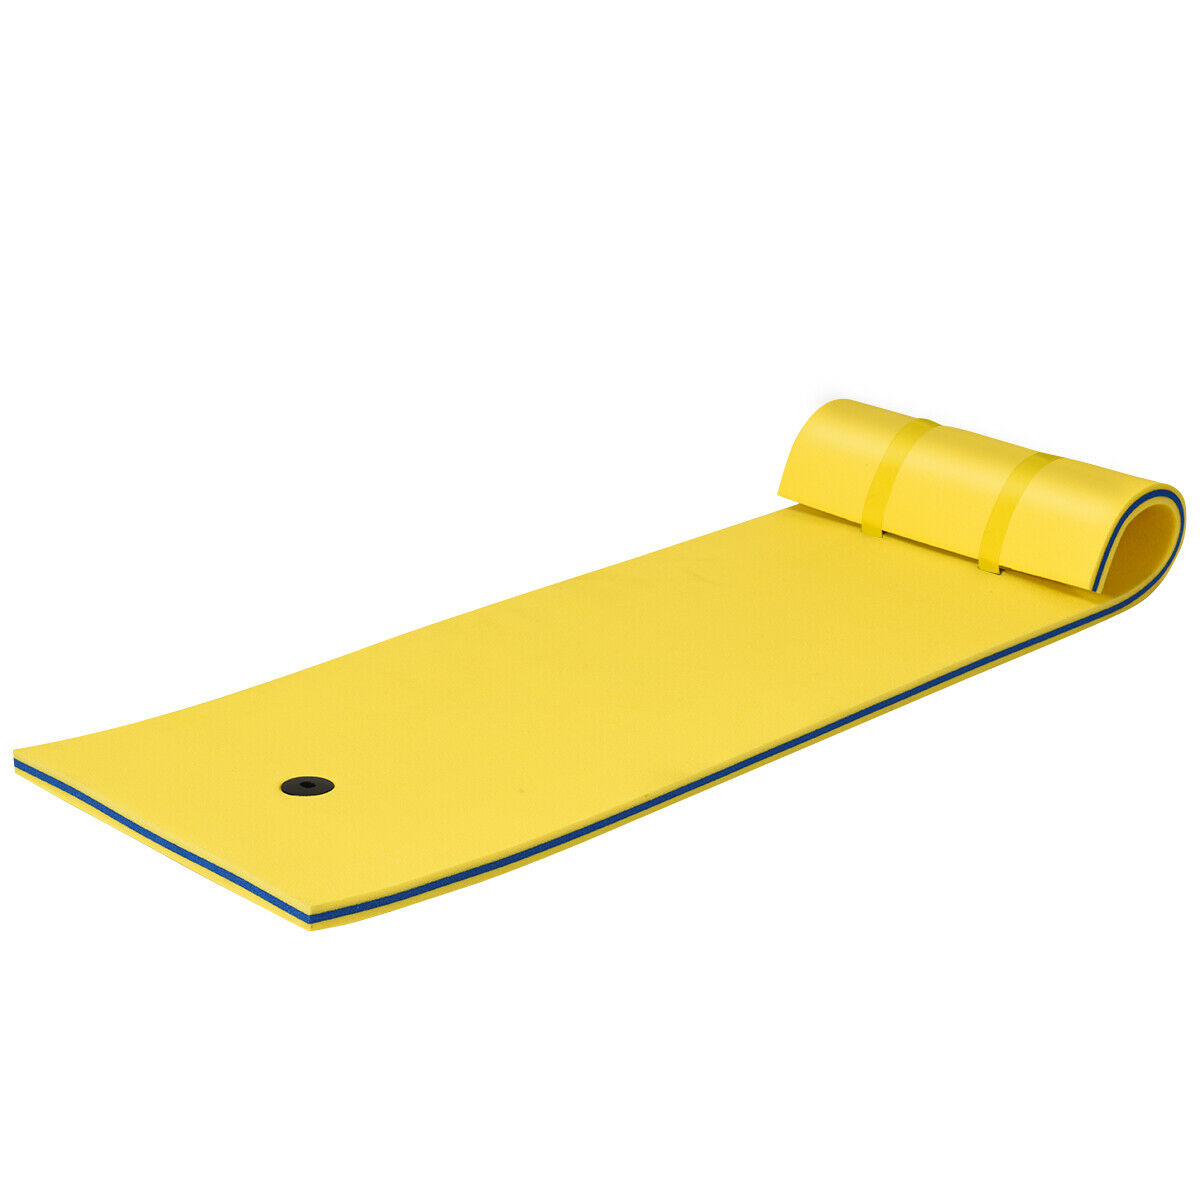 83'' X 26'' 3-layer Floating Pad Mat Water Sports Recreation Relaxing Yellow